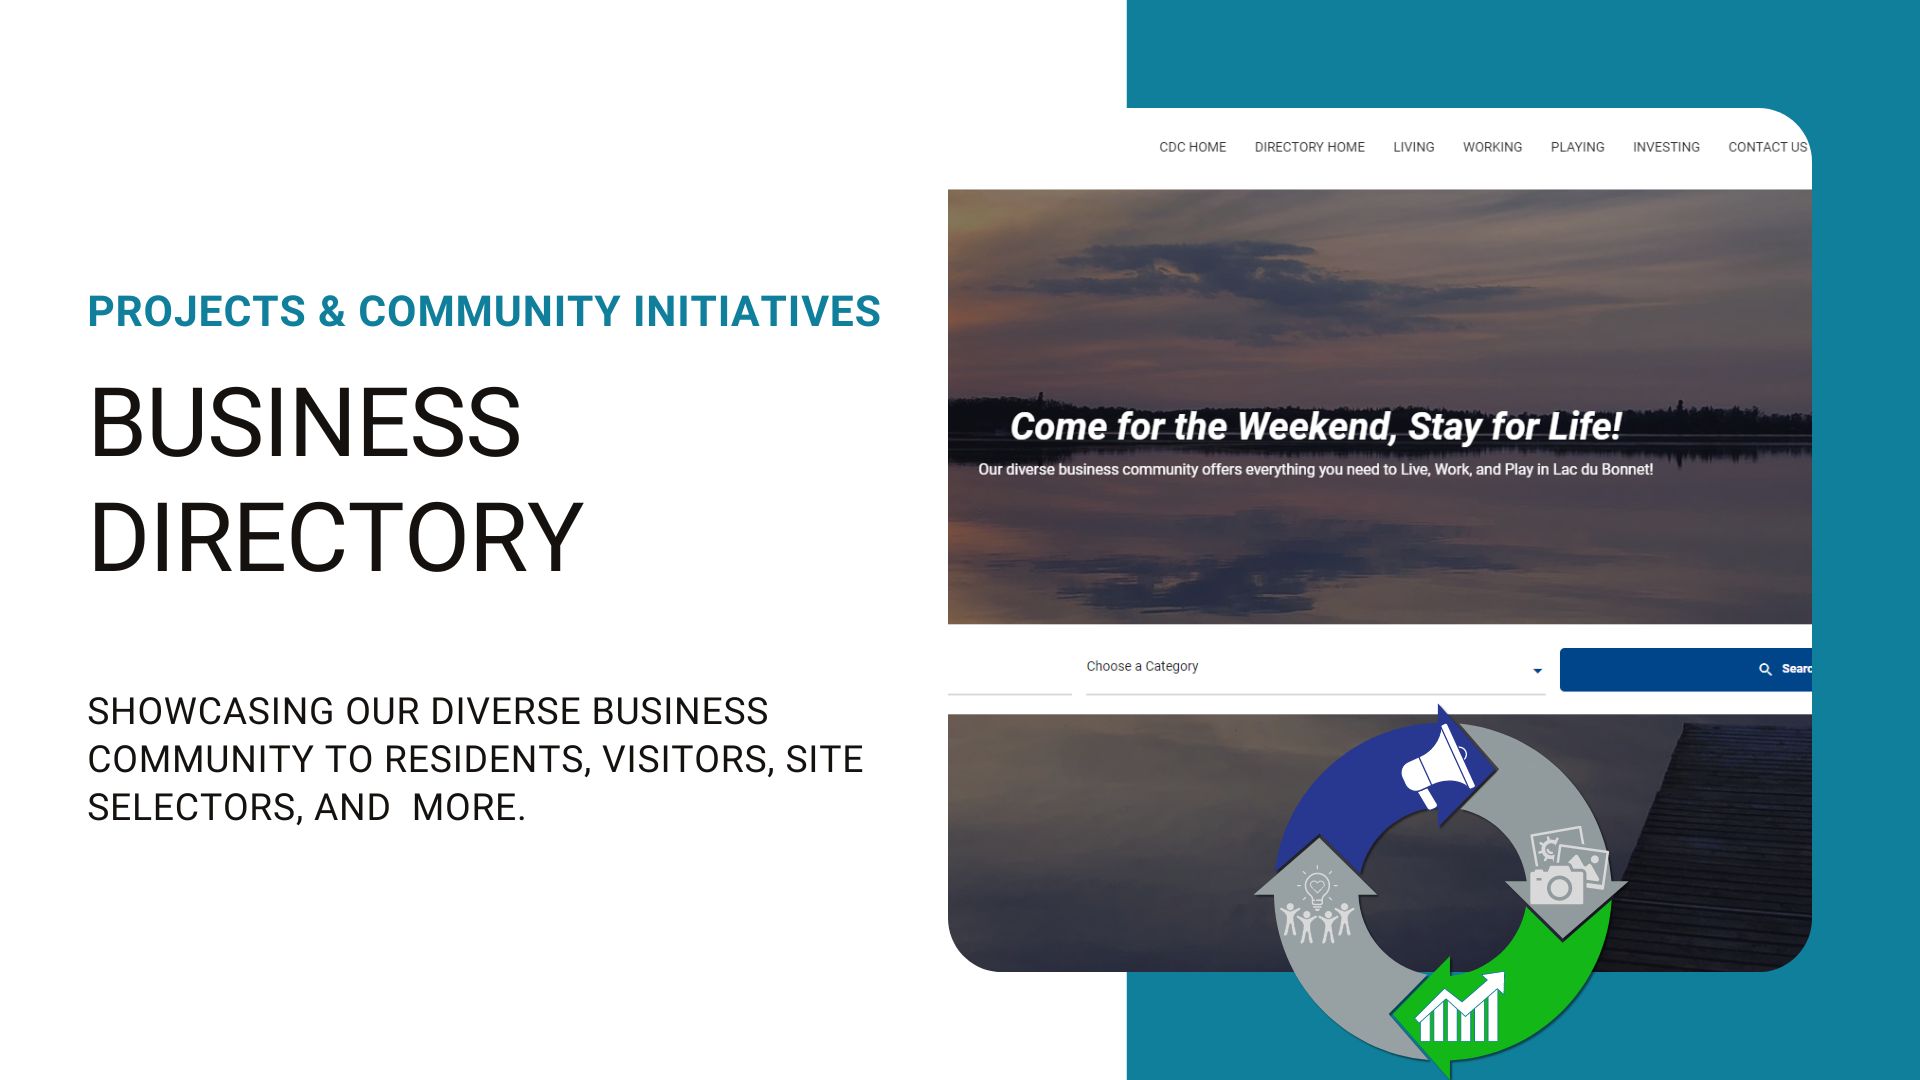 Graphic of the Lac du Bonnet CDC's Business Directory featuring a cover image of water and trees. There is writing saying 'come for the weekend, stay for life!' and under that it says 'Our diverse business community offers everything you need to Live, Work, and Play in Lac du Bonnet!'